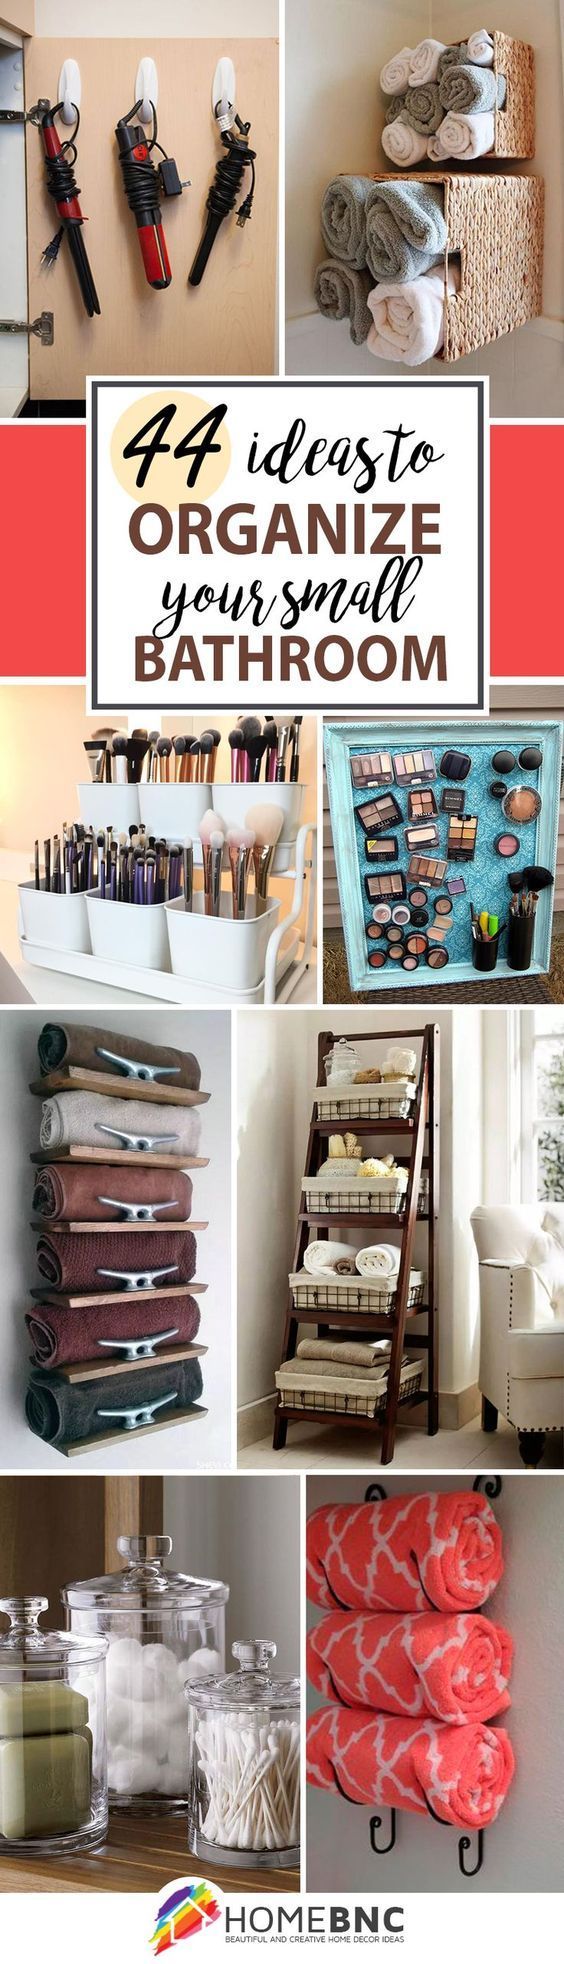 Re-organize your towels and toiletries during your next round of spring cleaning. Check out some of the best small bathroom